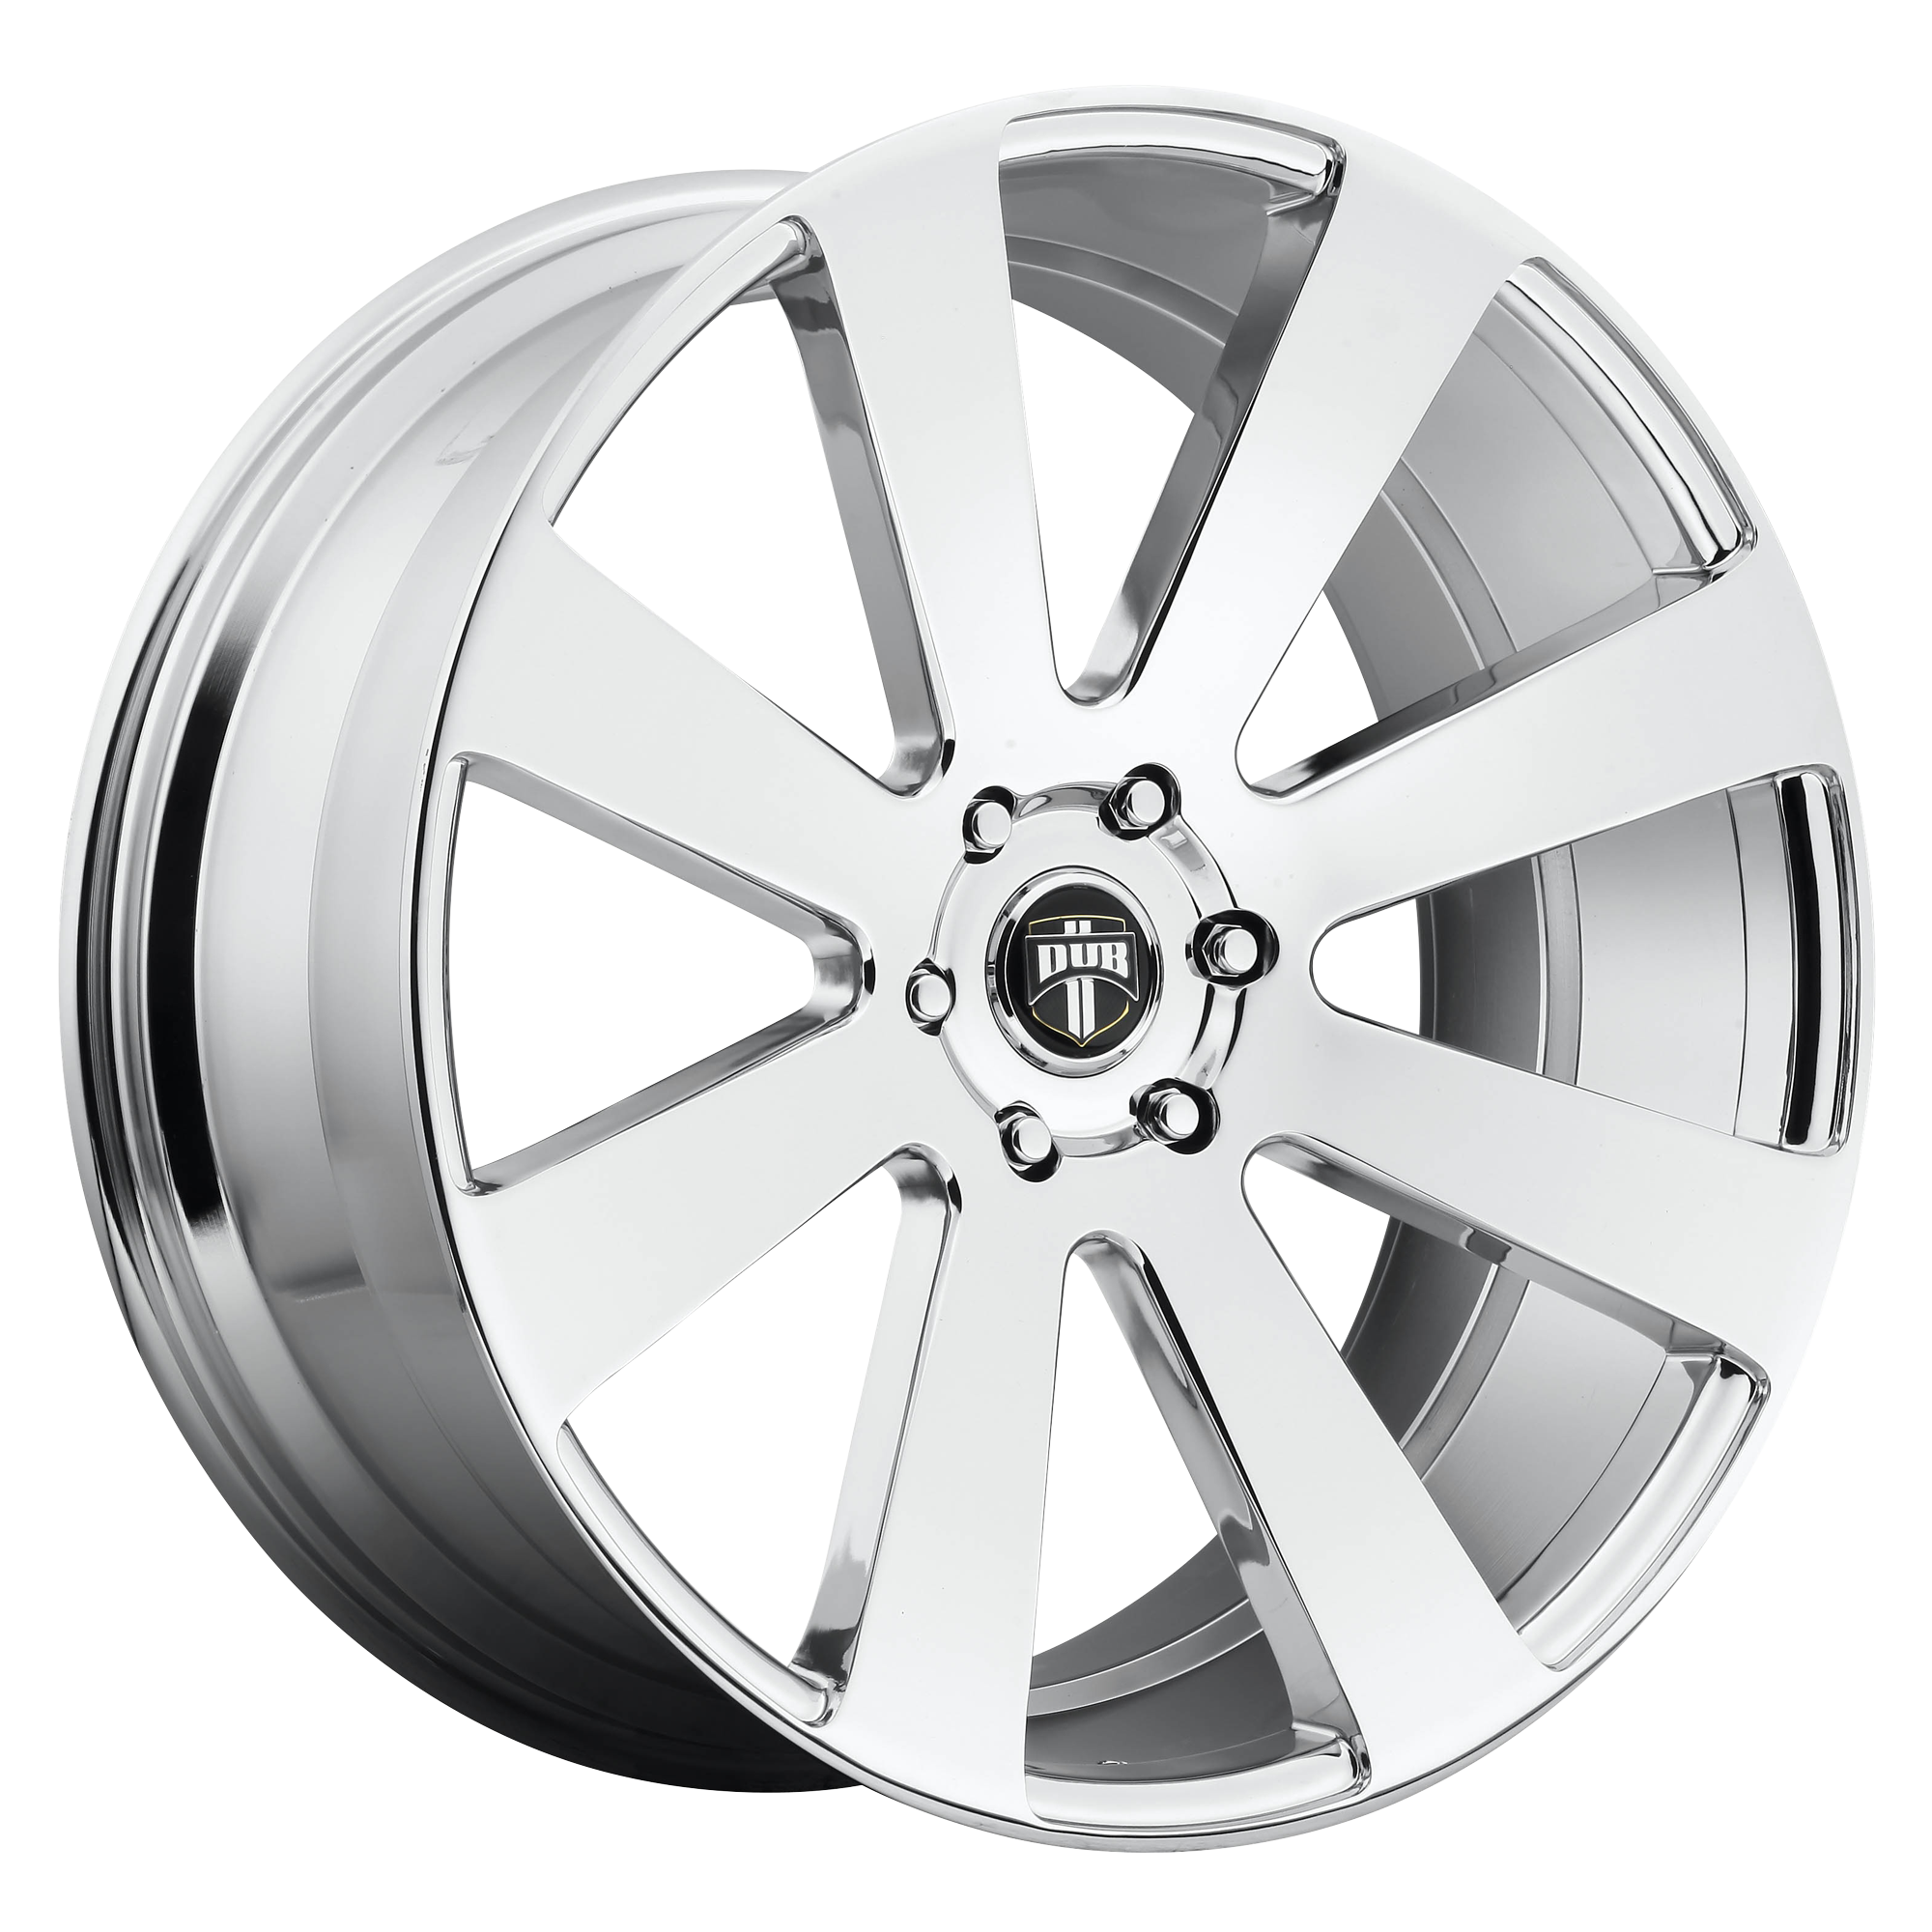 8-BALL 24x10 6x139.70 CHROME PLATED (20 mm) - Tires and Engine Performance